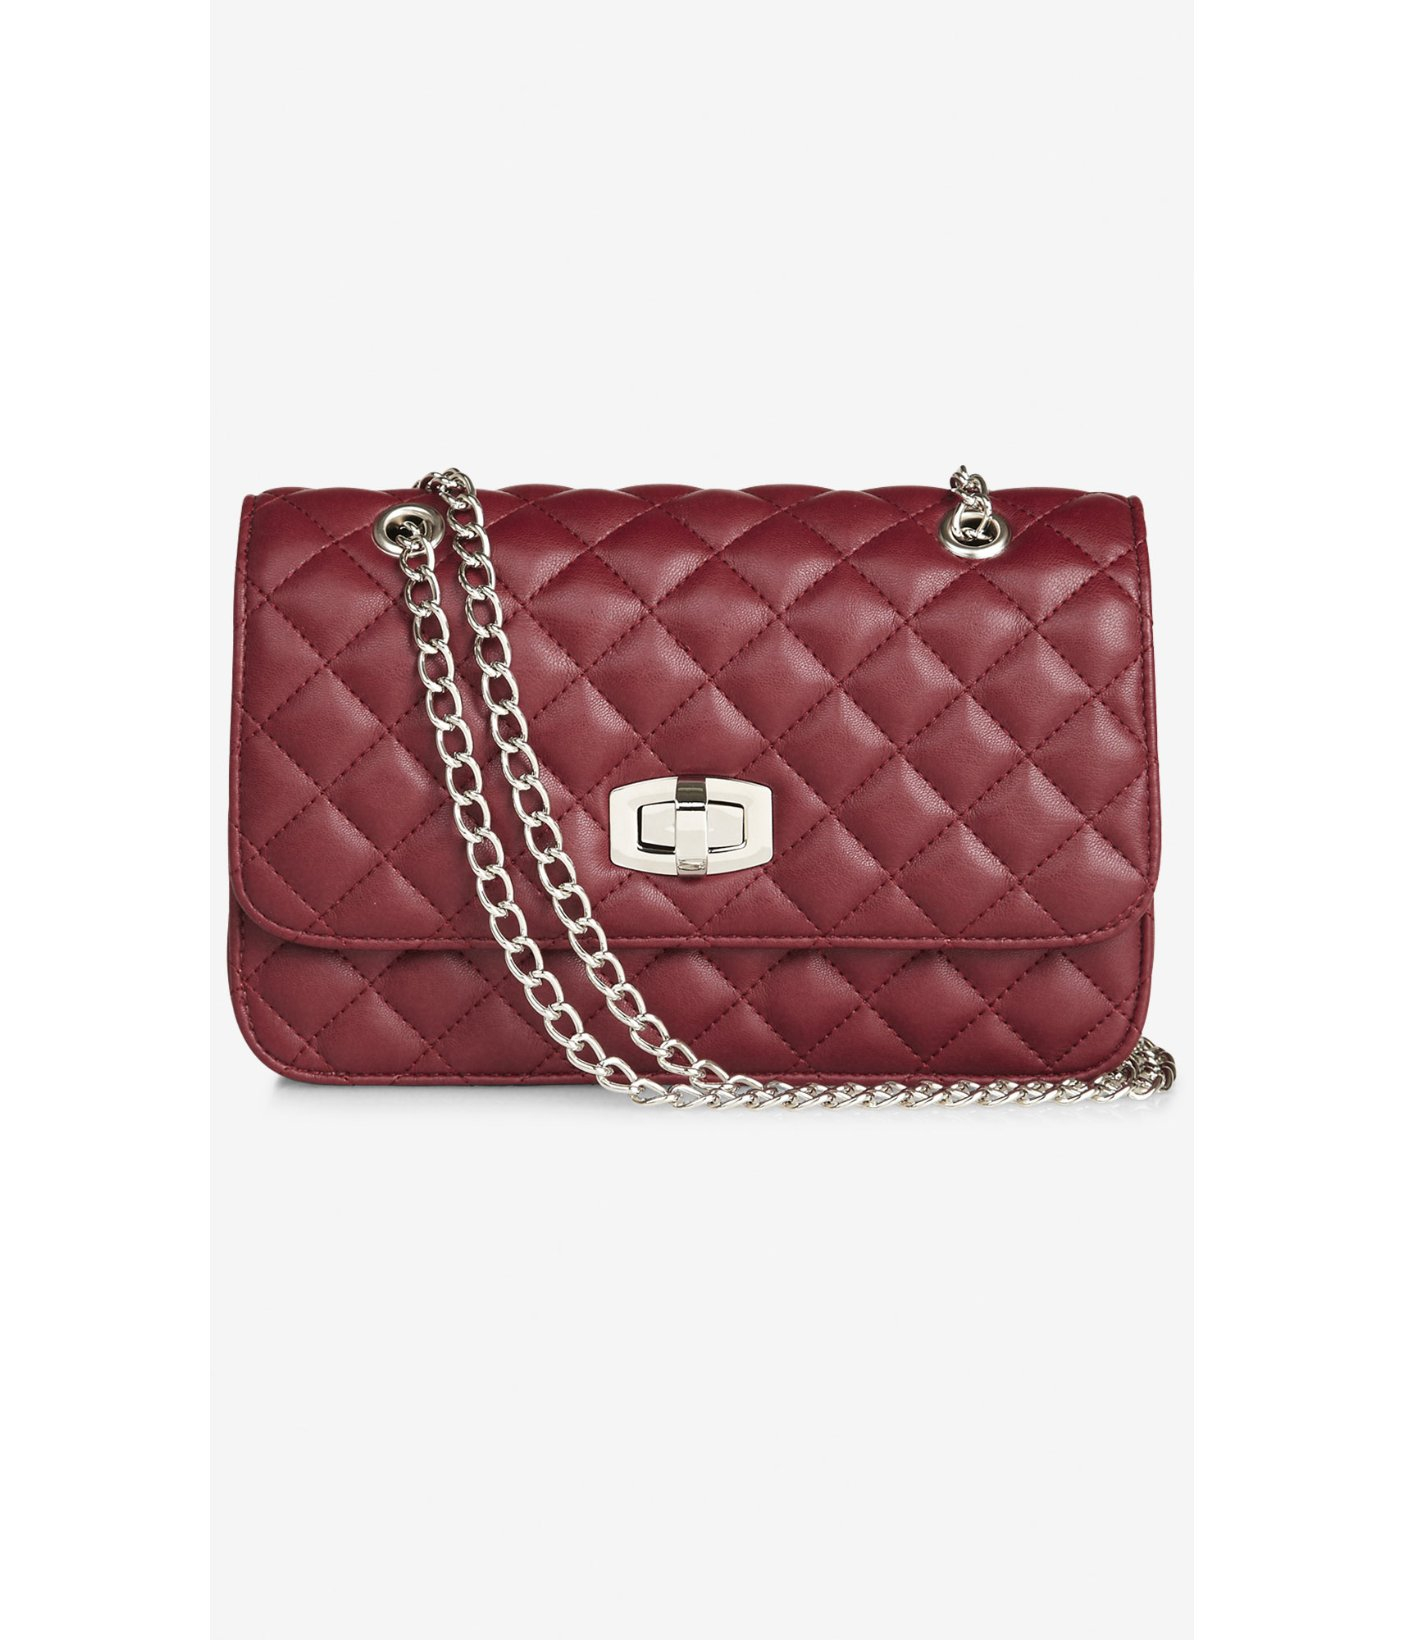 Express Quilted Chain Strap Shoulder Bag in Red (WINE BERRY) | Lyst